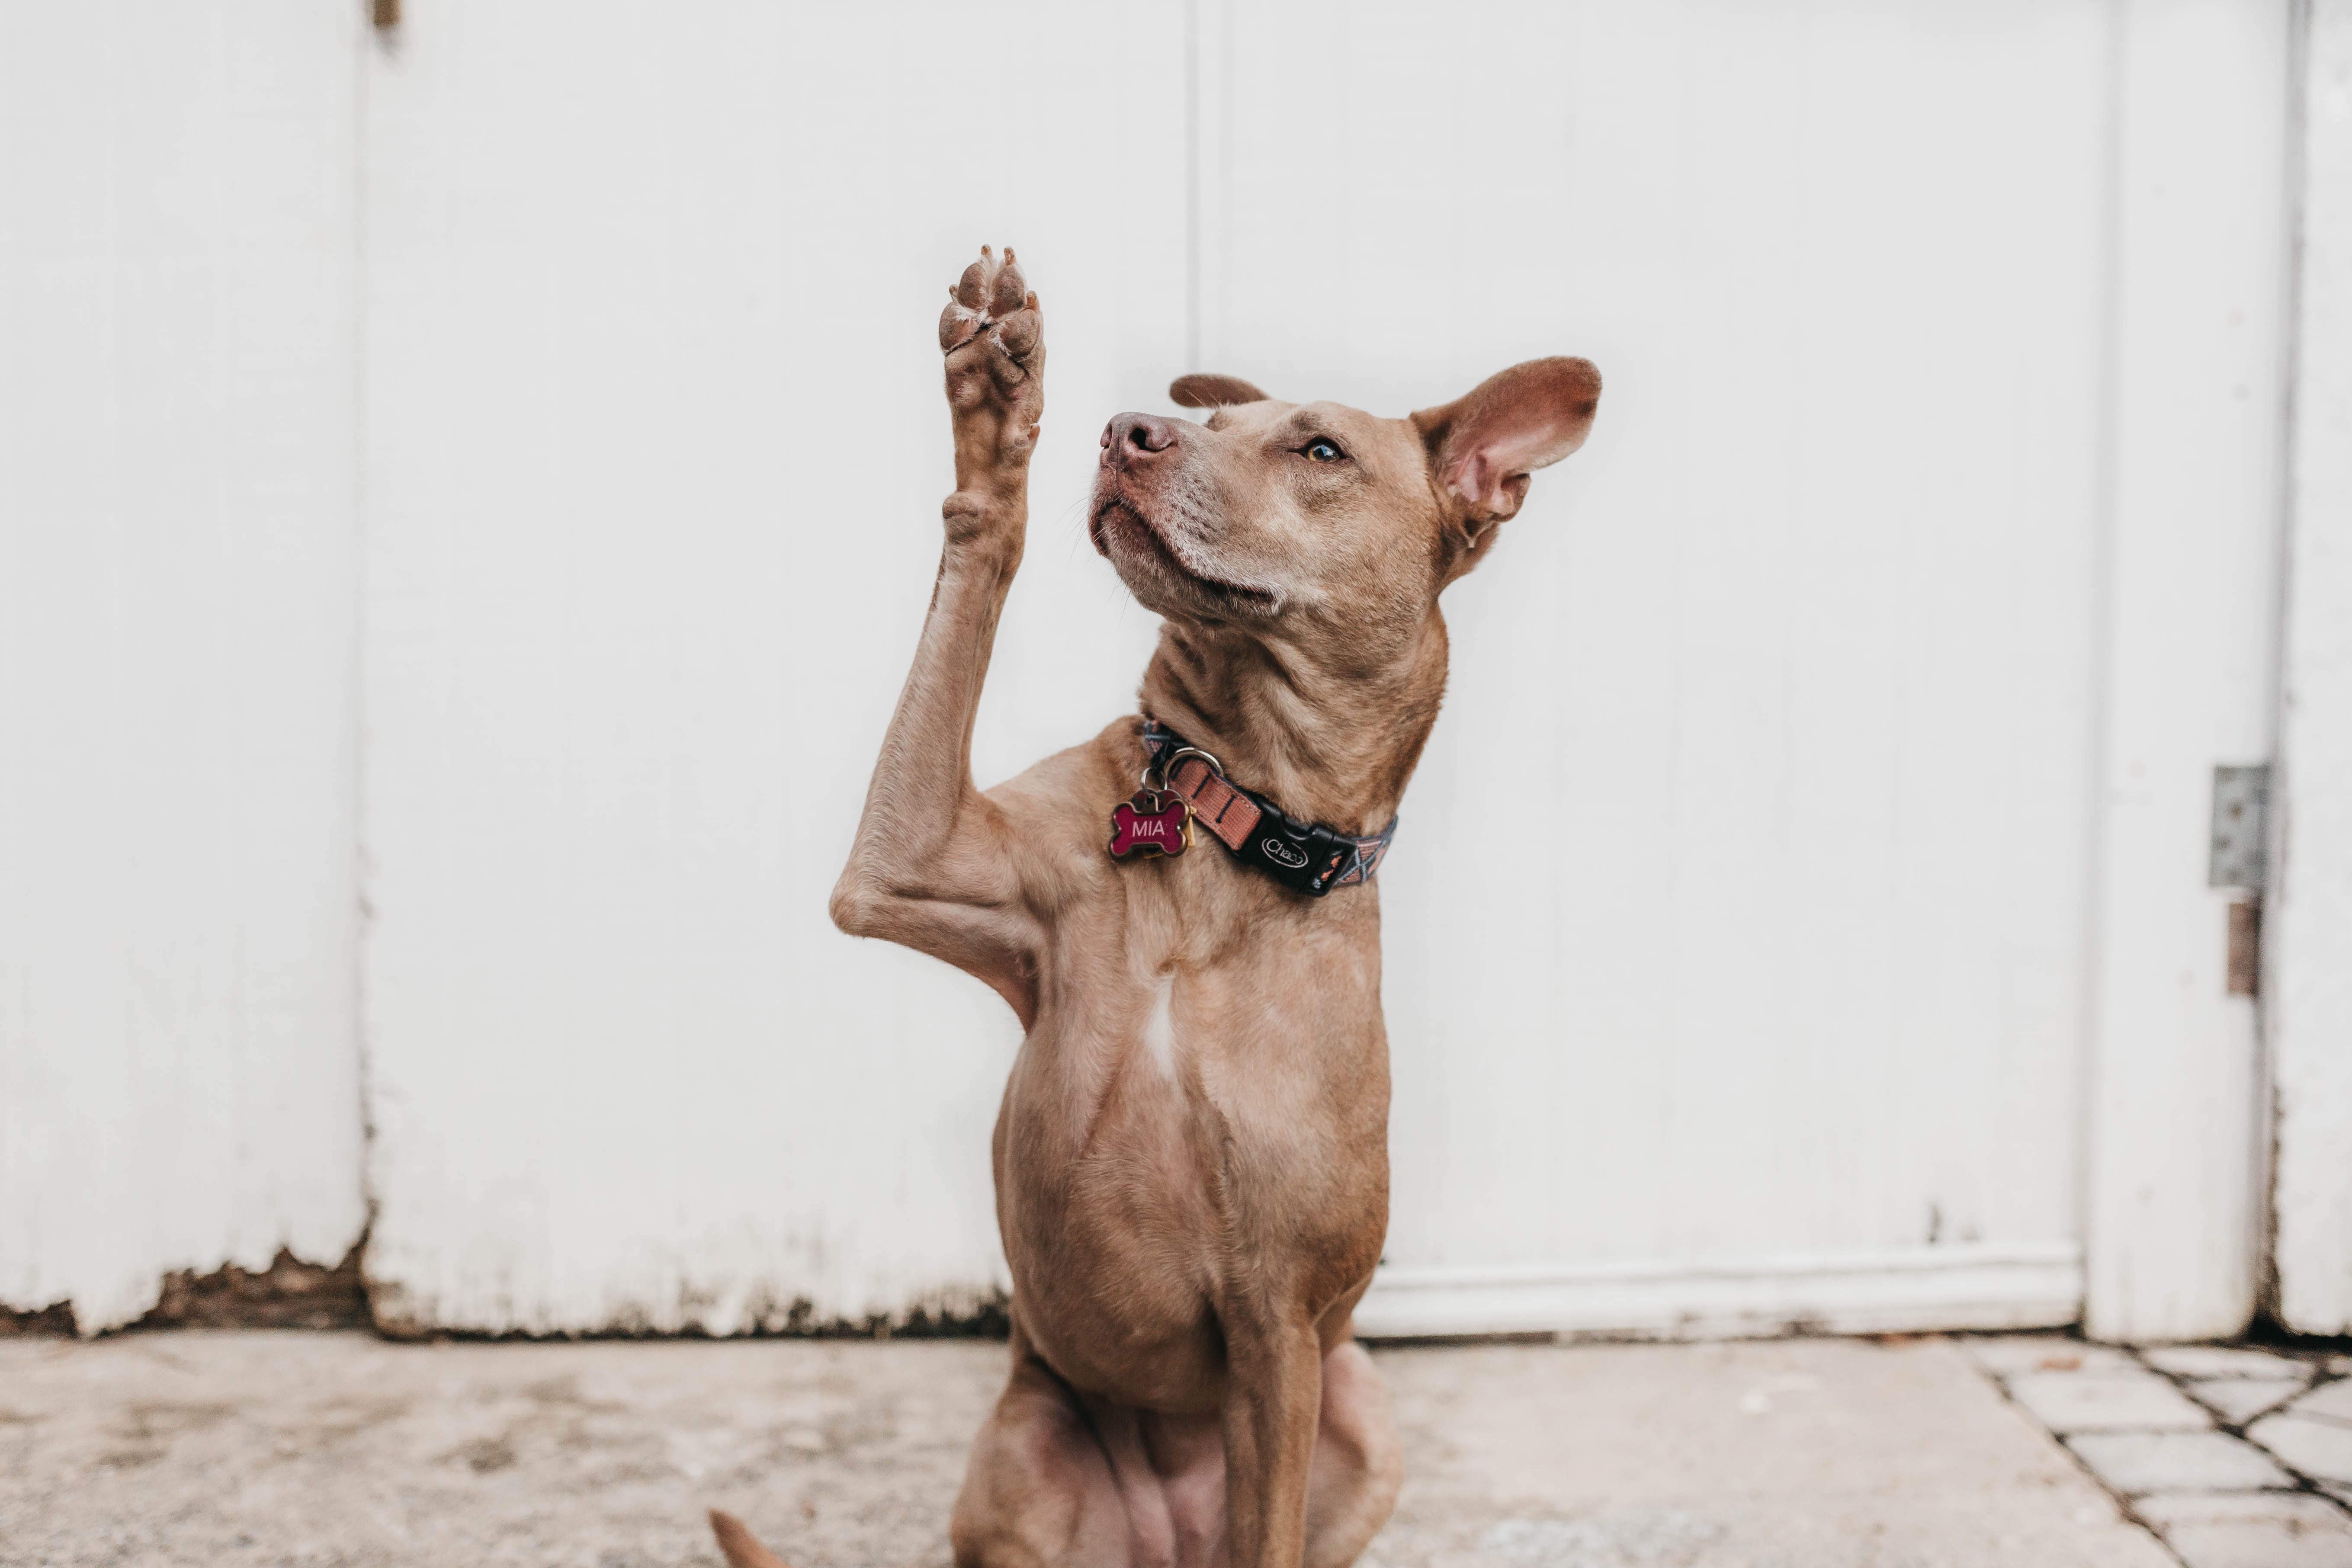 Dog Defiantly Standing on Hind Legs When Owner Says 'No' Delights